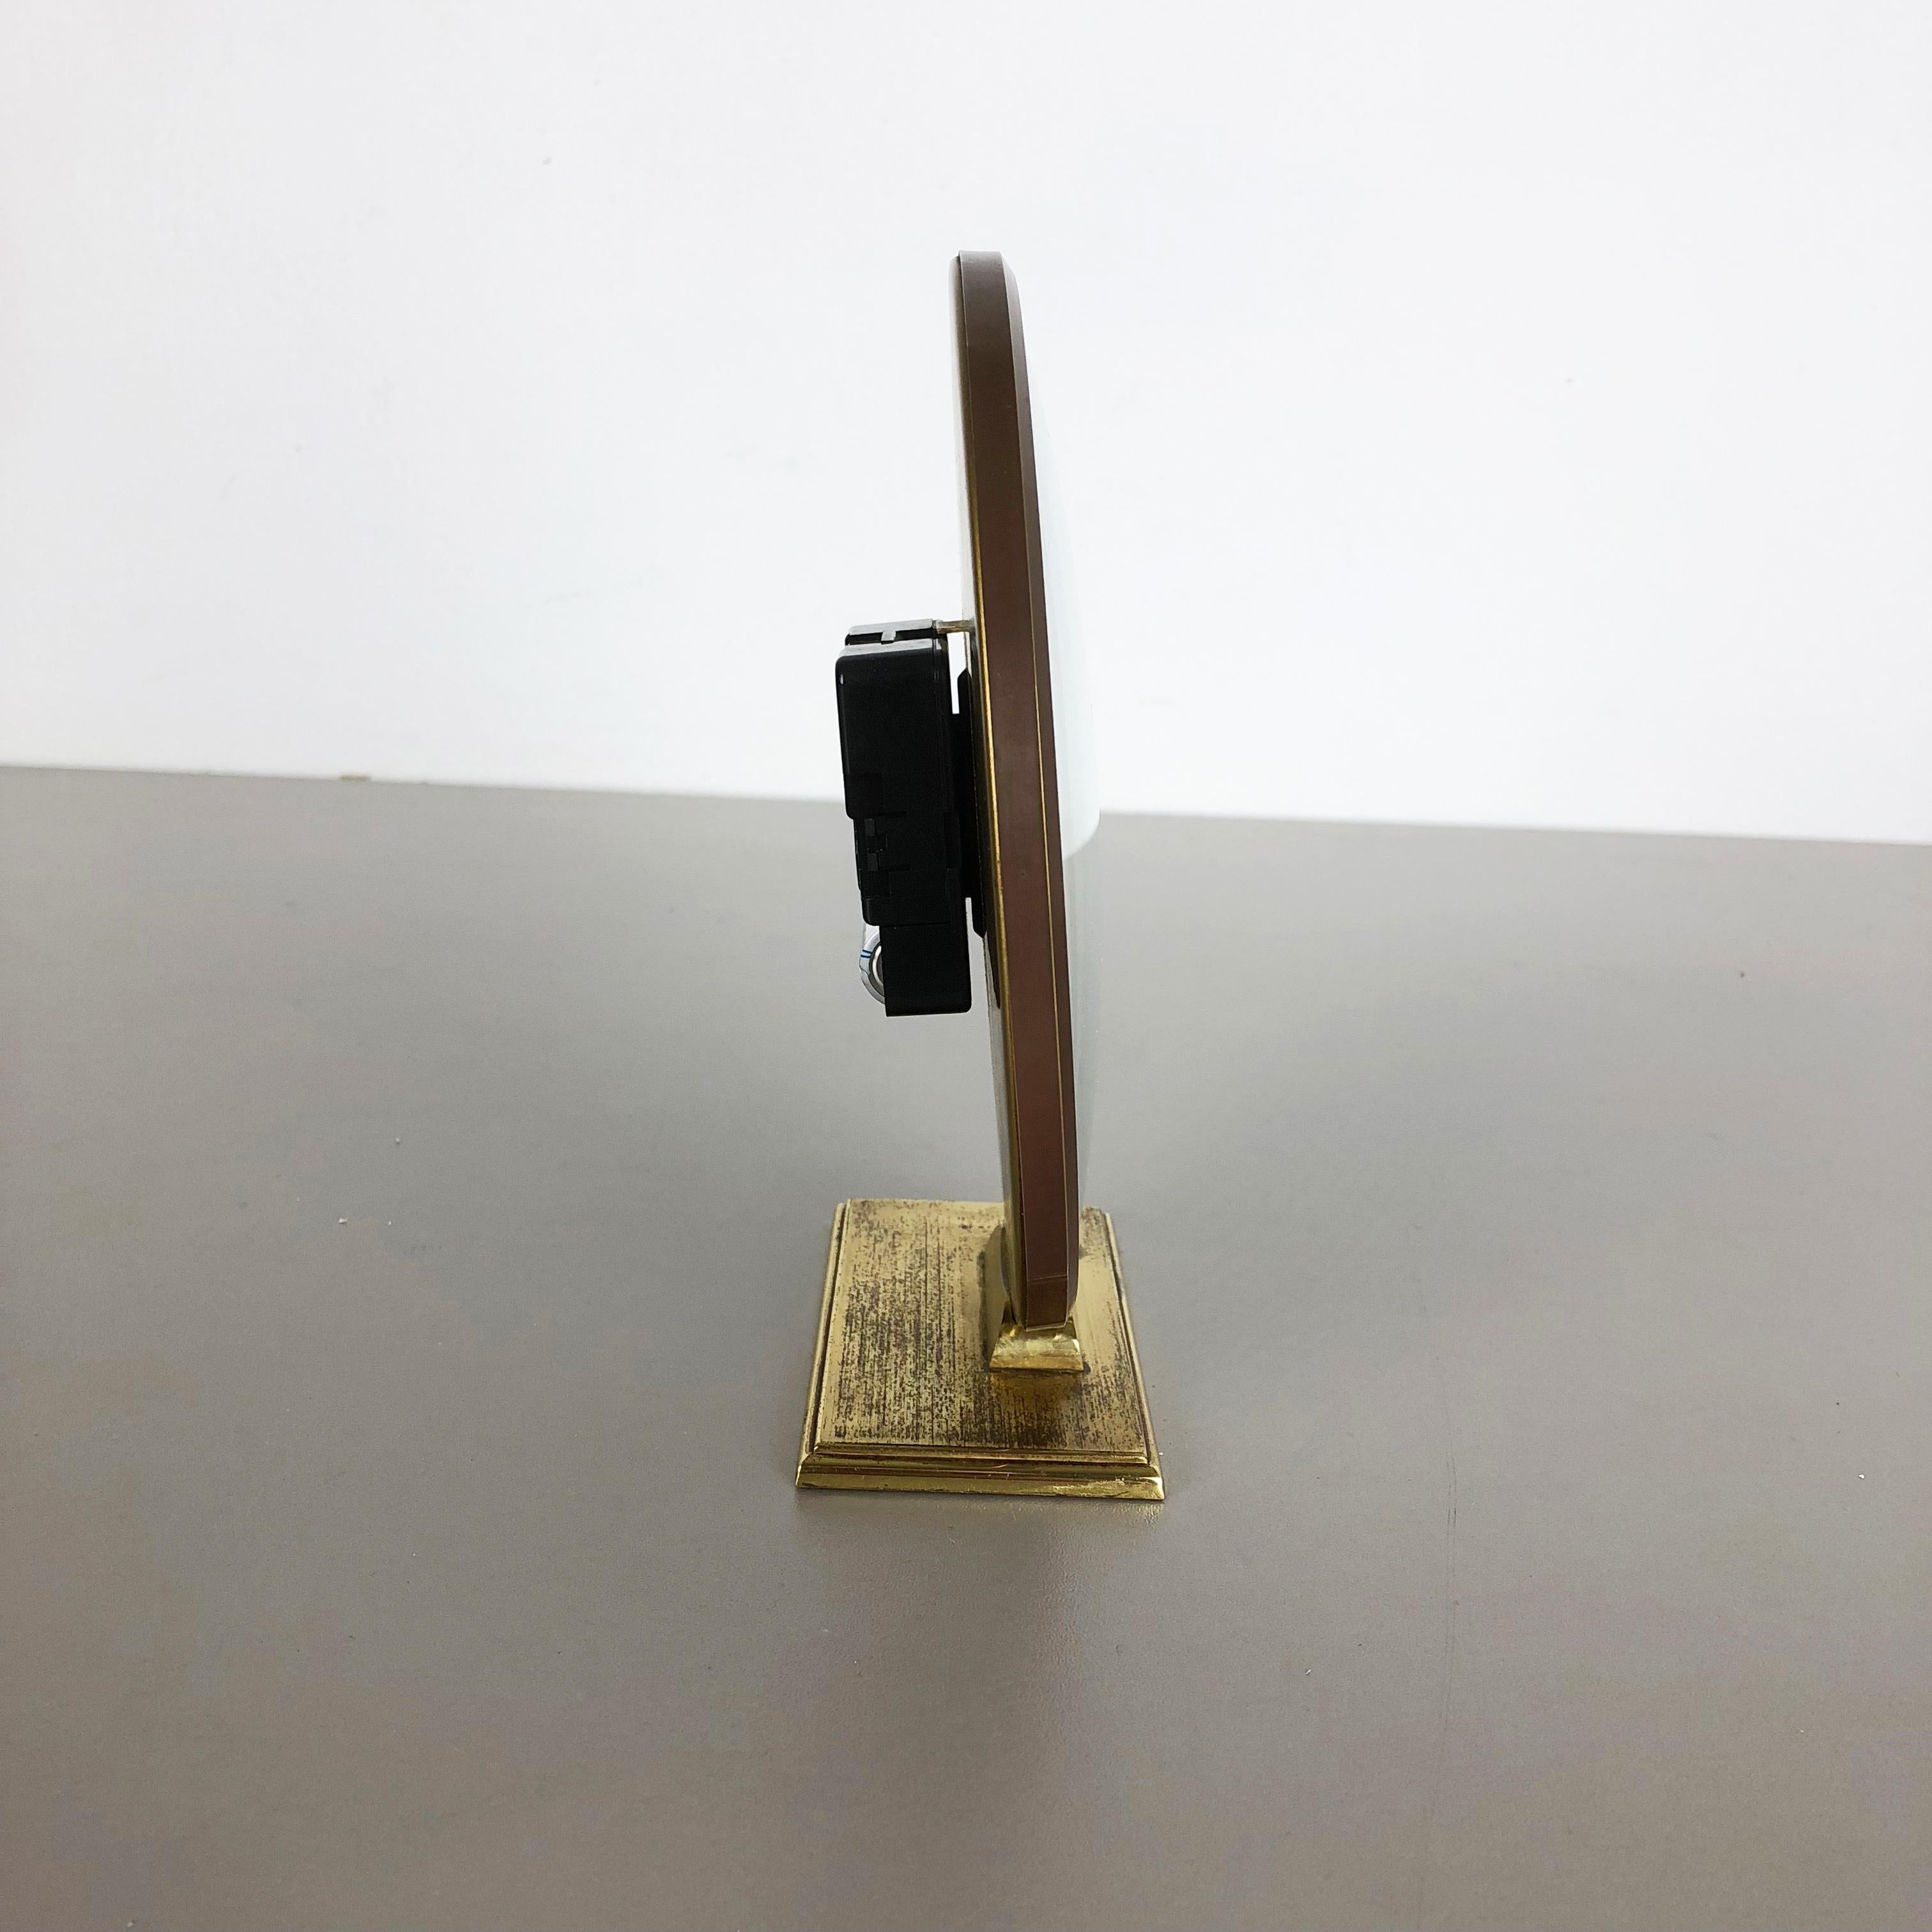 Vintage 1960s Modernist Brass Metal Ato, Mat Table Clock by Junghans, Germany 1